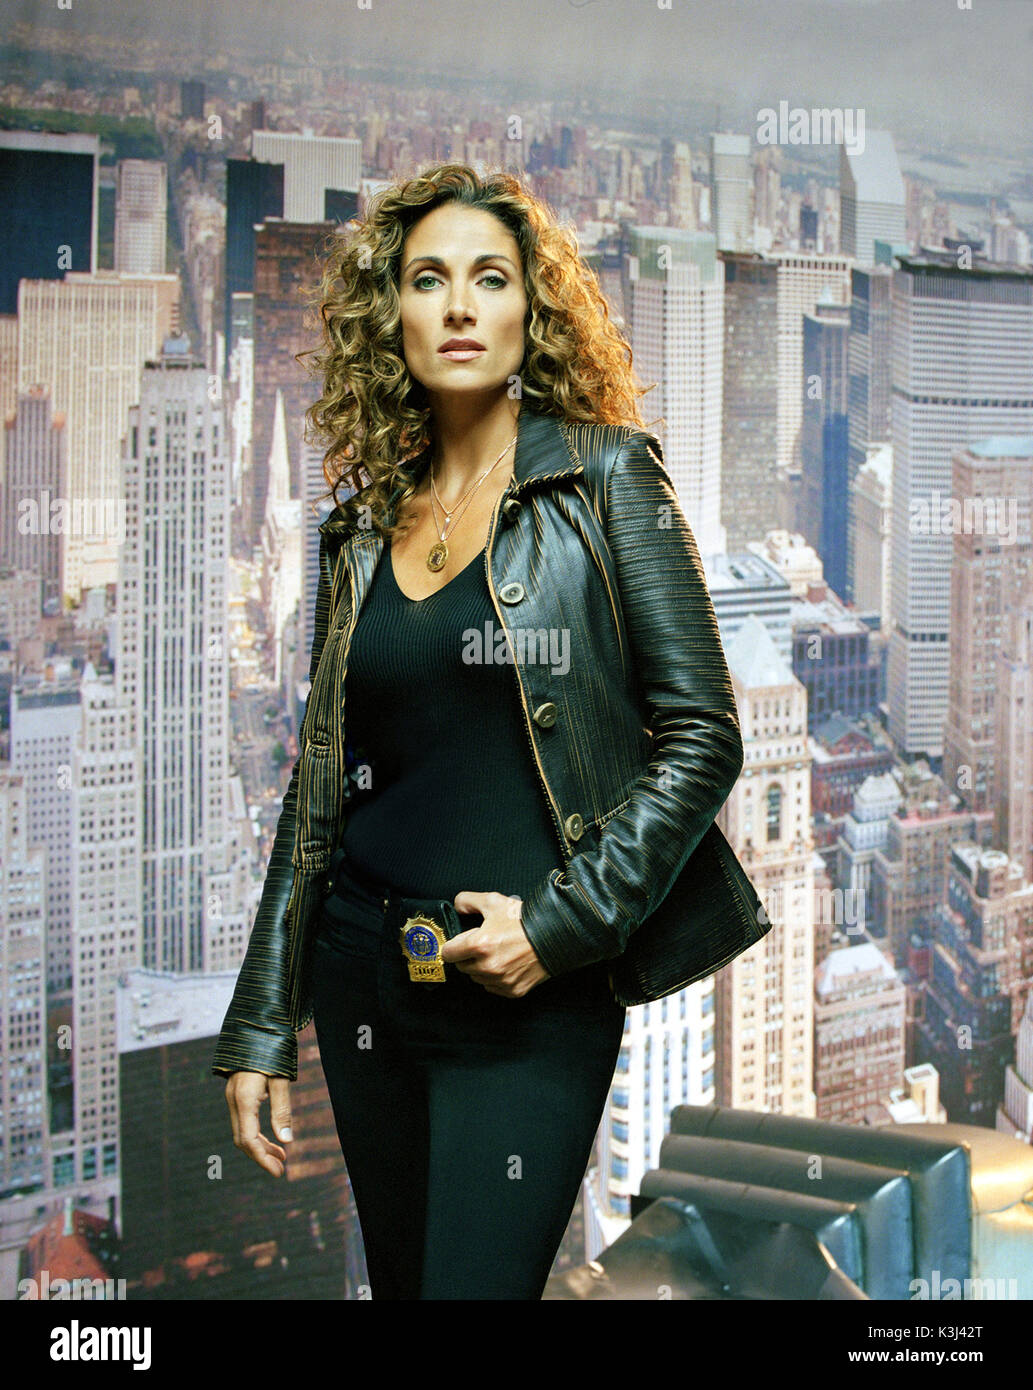 Melina Kanakaredes Age, Height, Weight, Body, Boyfriend, Husband, Caste,  Religion, Net Worth, Assets, Salary, Family, Affairs, Wiki, Biography,  Filmography, Facts, News, Photos, Videos and More